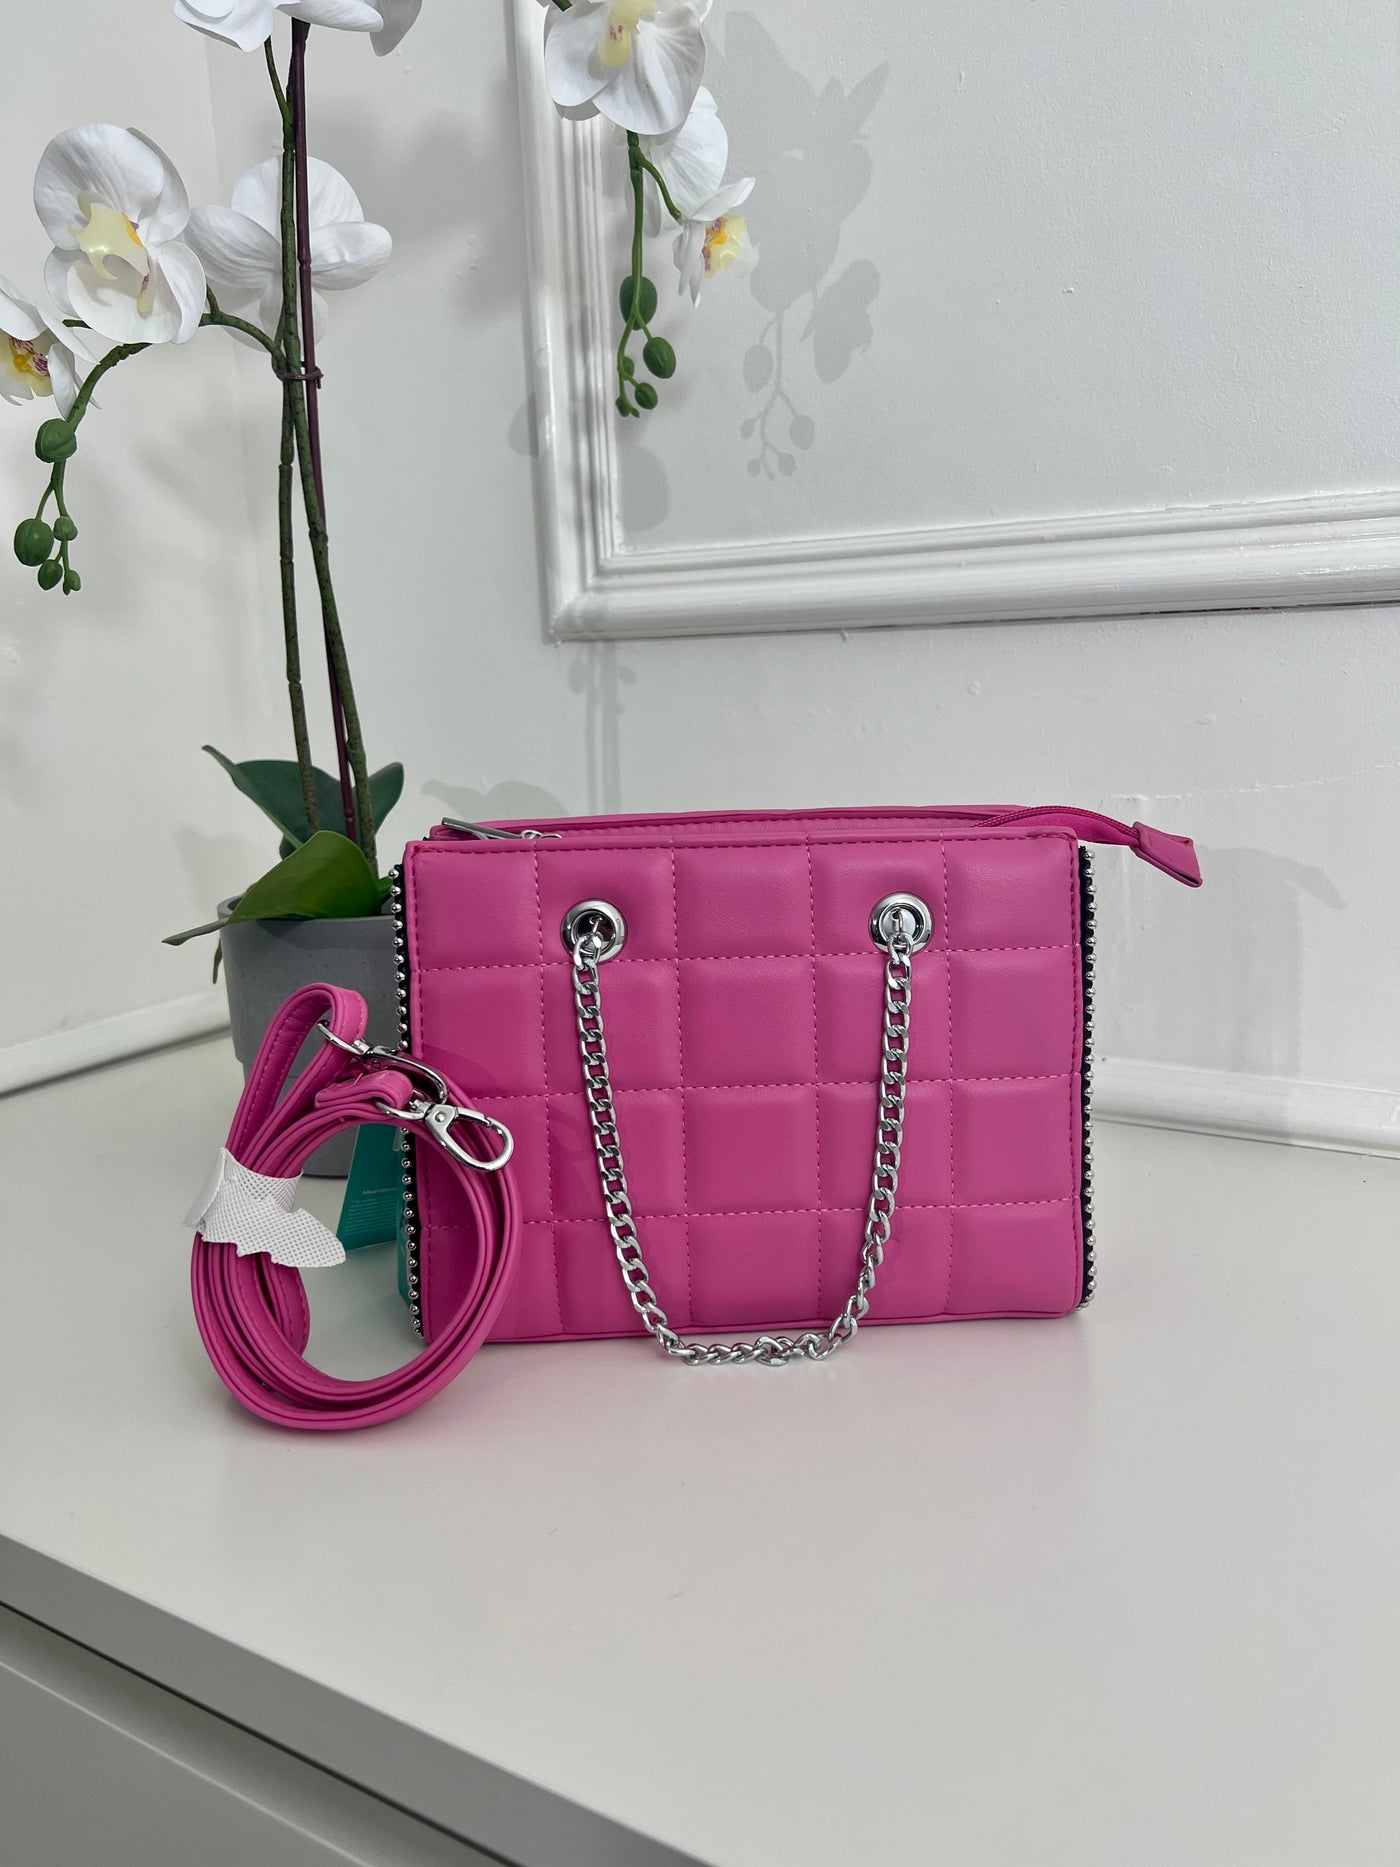 PINK QUILTED HANDBAG WITH CHAIN HANDELS AND LEATHER STRAP BAG